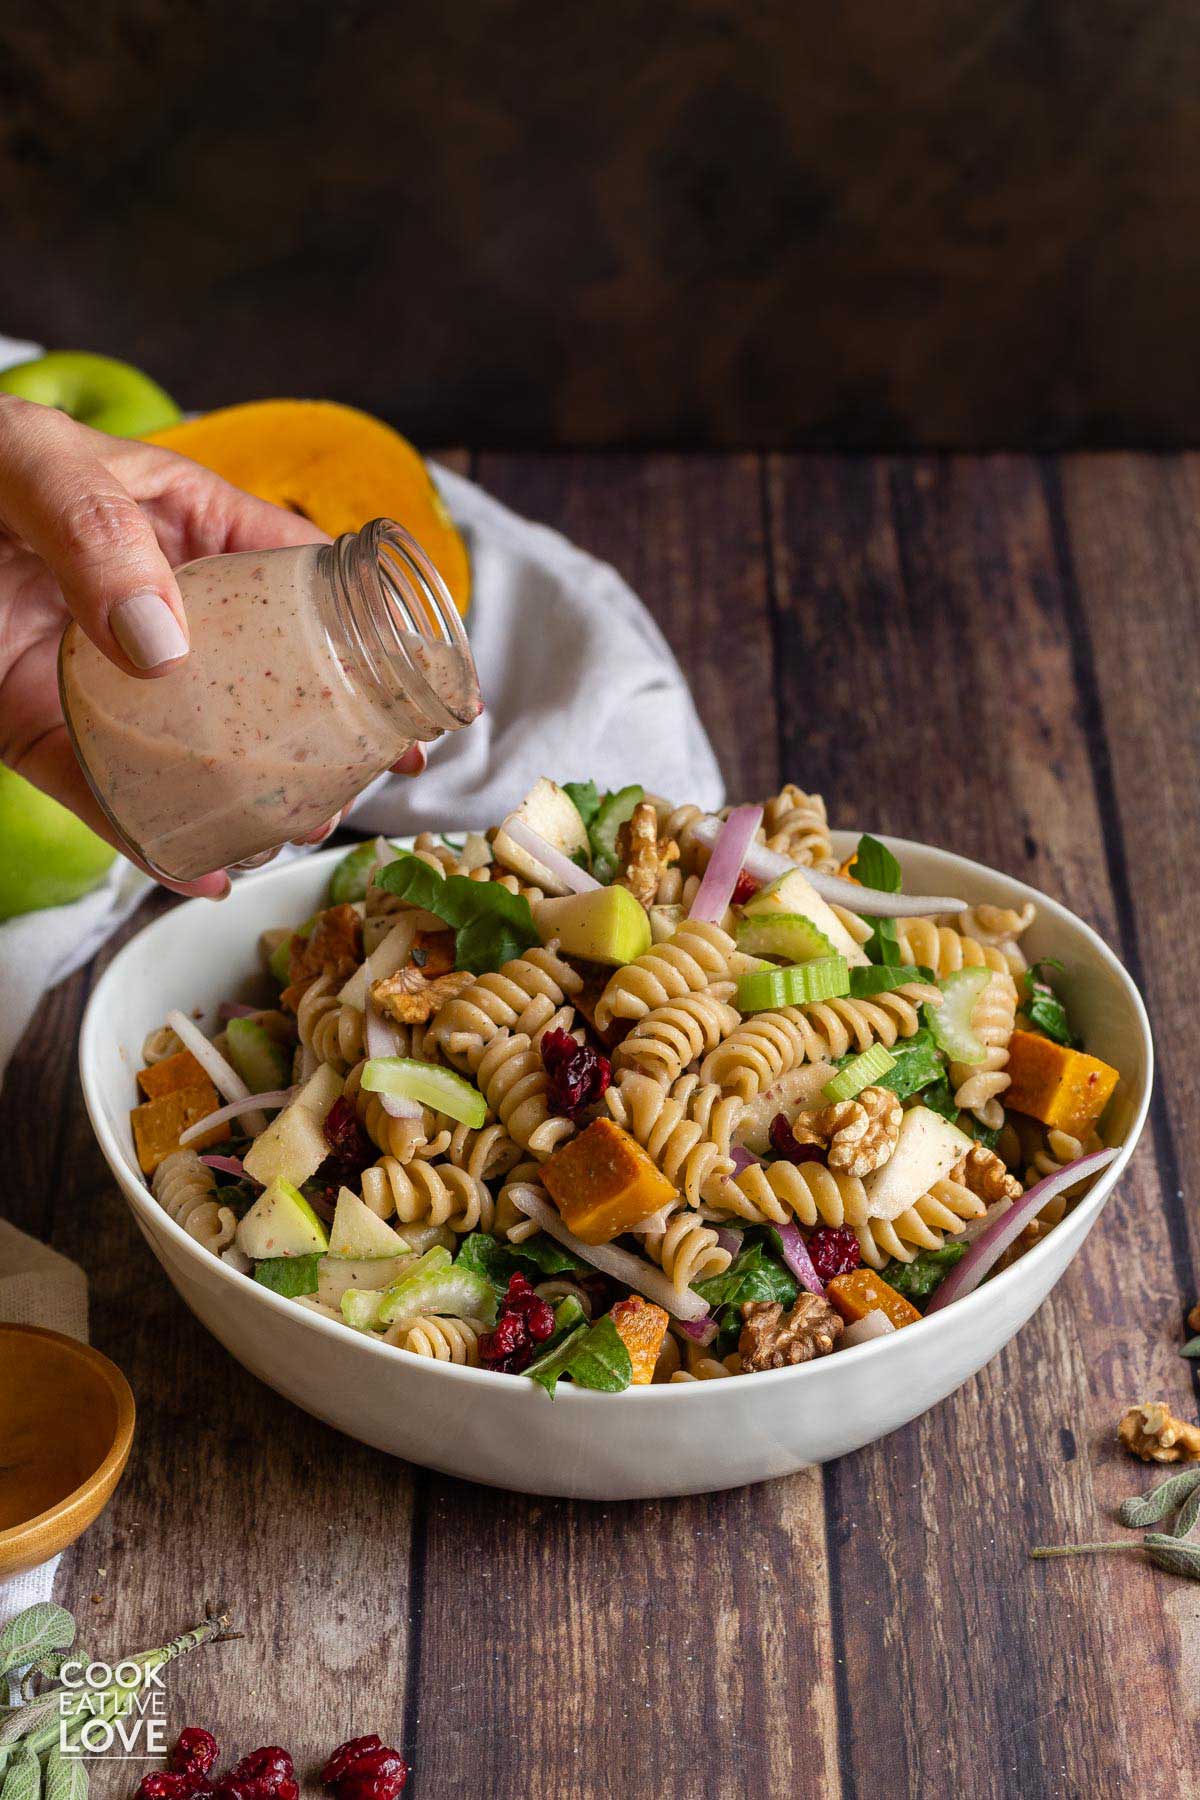 A hand pouring the dressing over the fall pasta salad in a bowl.